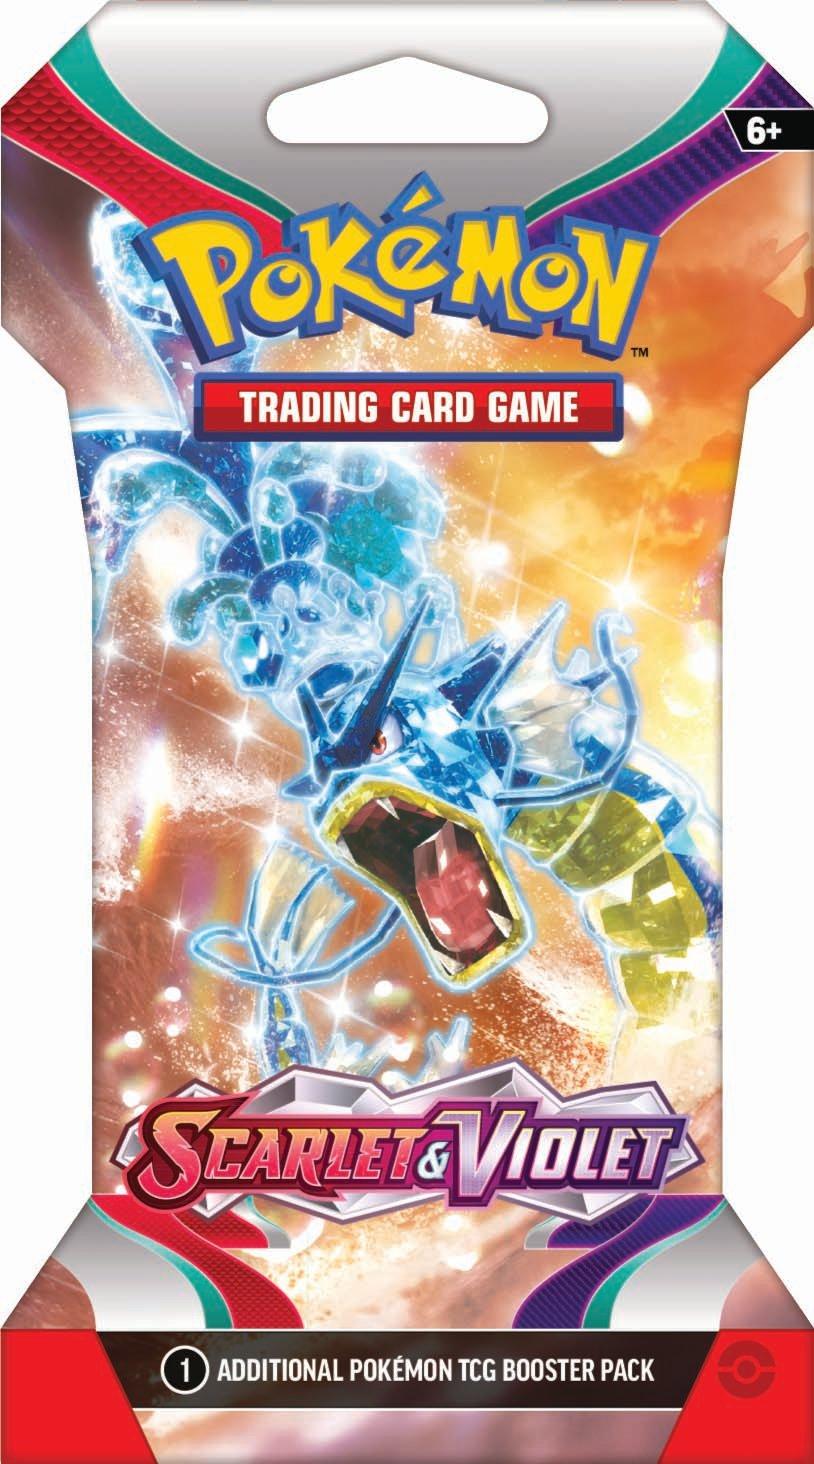 https://media.gamestop.com/i/gamestop/20002522_ALT01/Pokemon-Trading-Card-Game-Scarlet-and-Violet-Sleeved-Booster-Pack-Styles-May-Vary?$pdp$